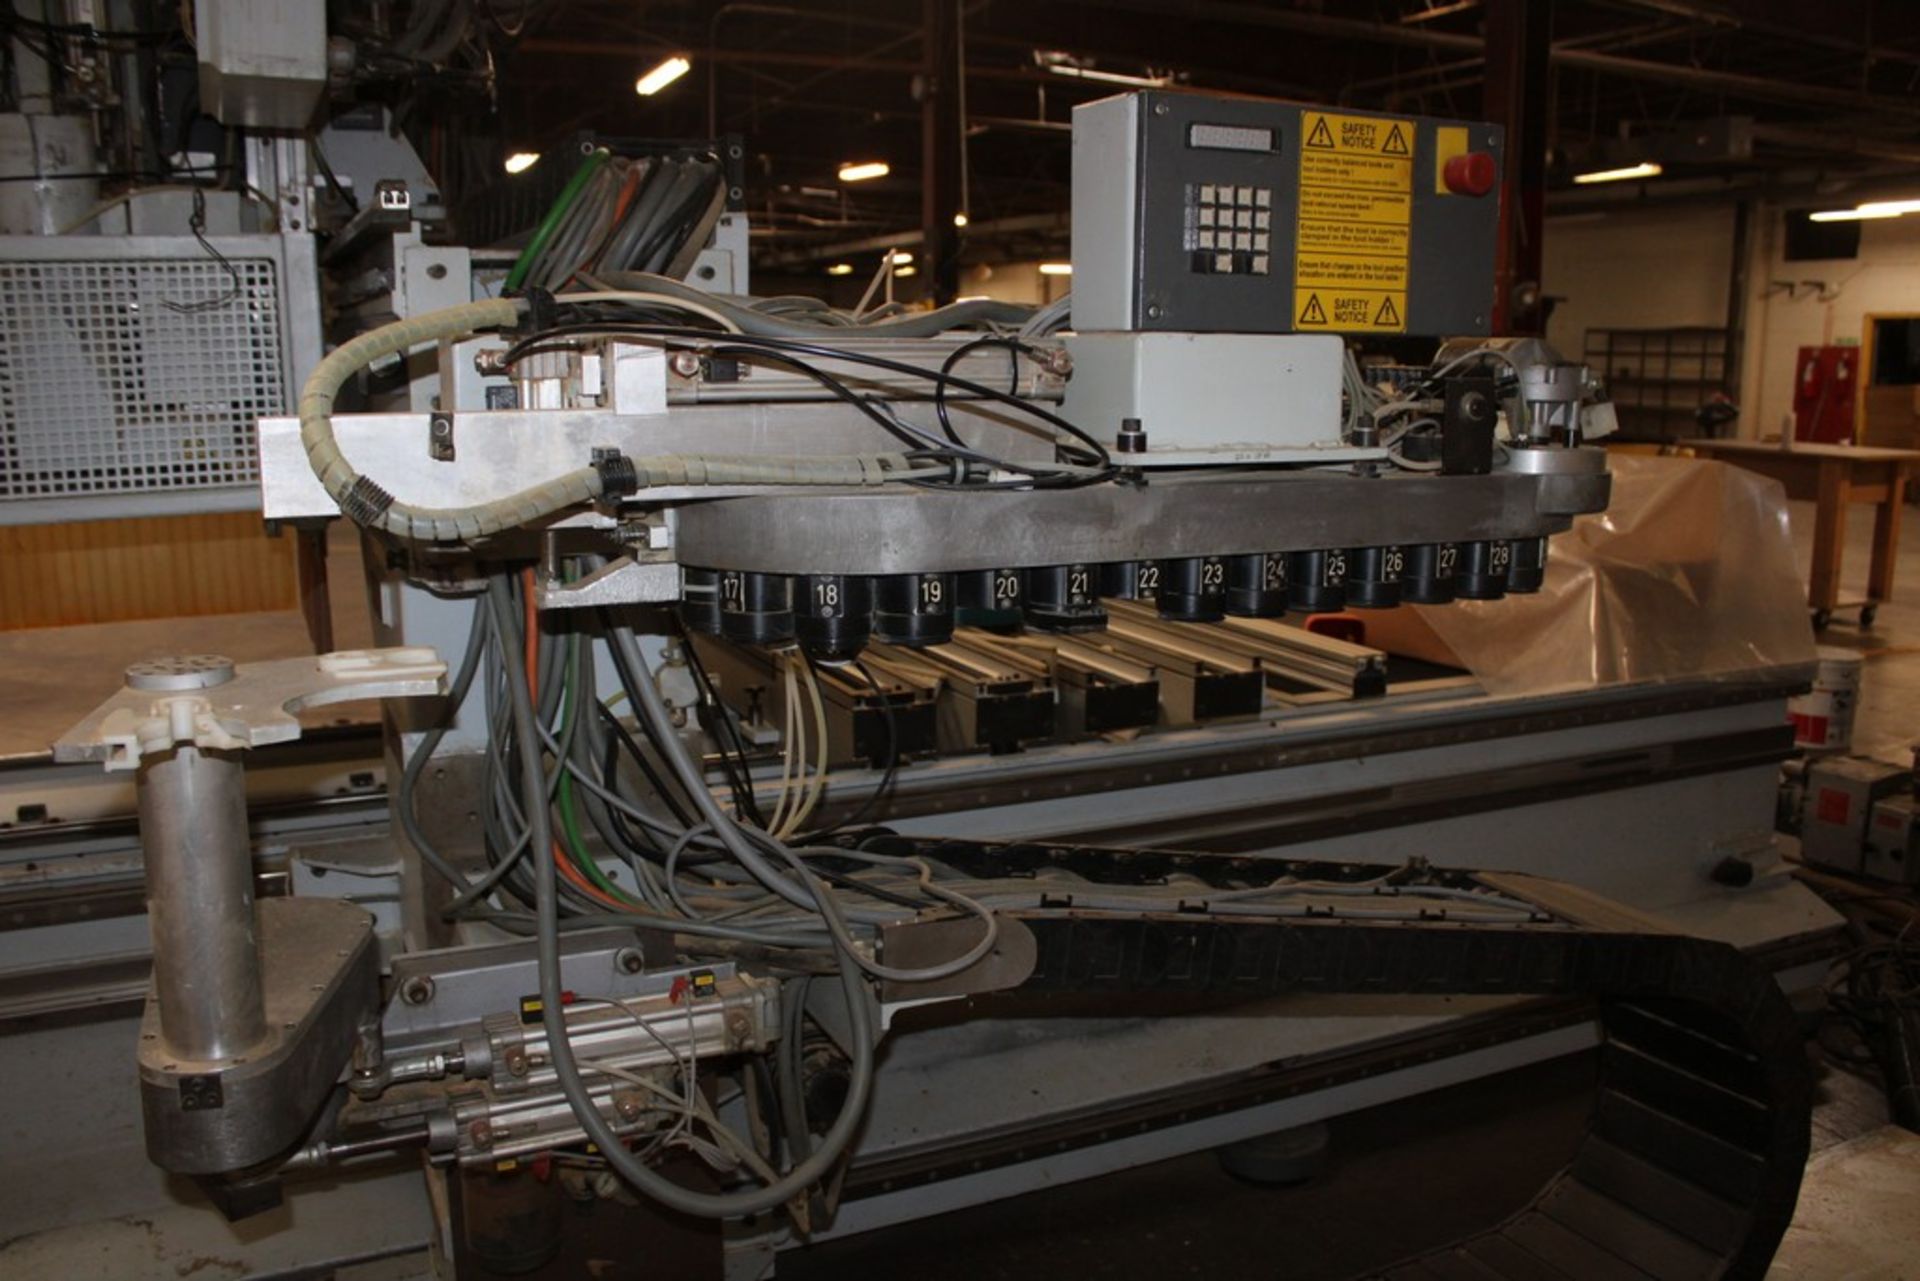 WEEKE MODEL BP150 POINT TO POINT CNC ROUTER, S/N 0-250-05-3068 (NEW 1999), WITH 30 STATION AUTOMATIC - Image 7 of 18